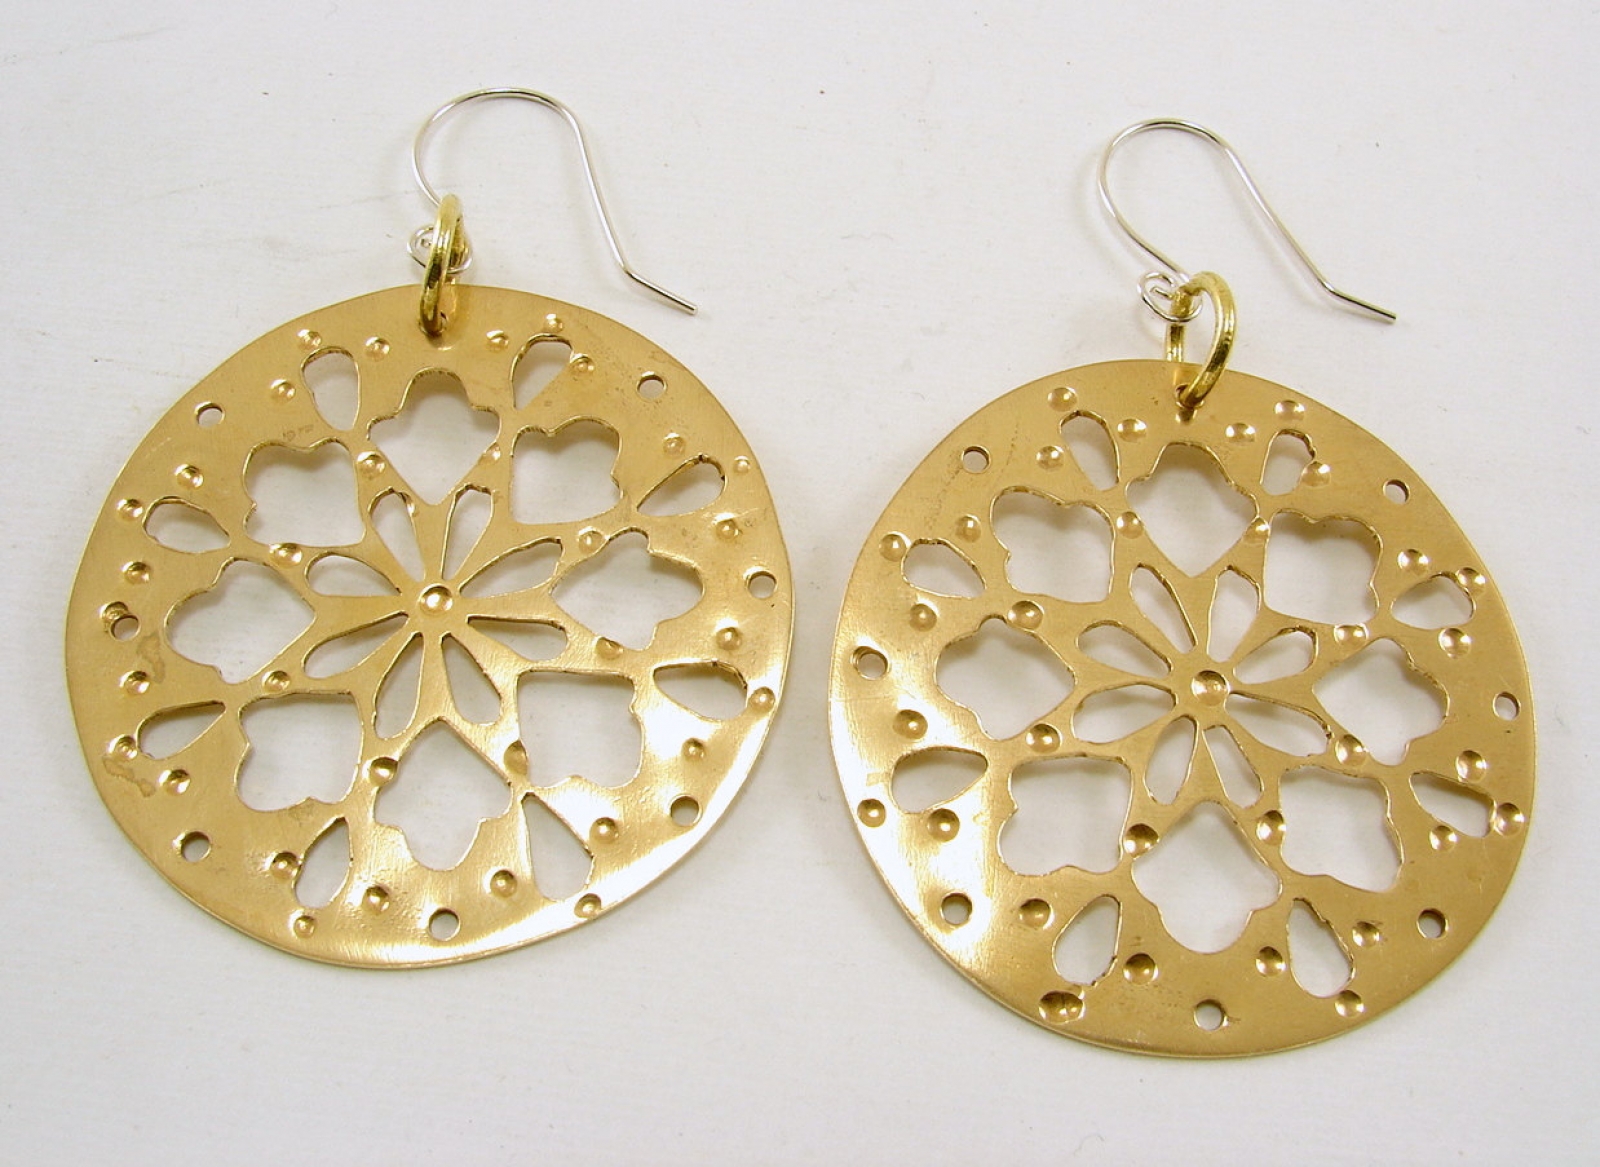 Copper or Red Brass and Sterling Silver Fretwork Earrings | Second ...